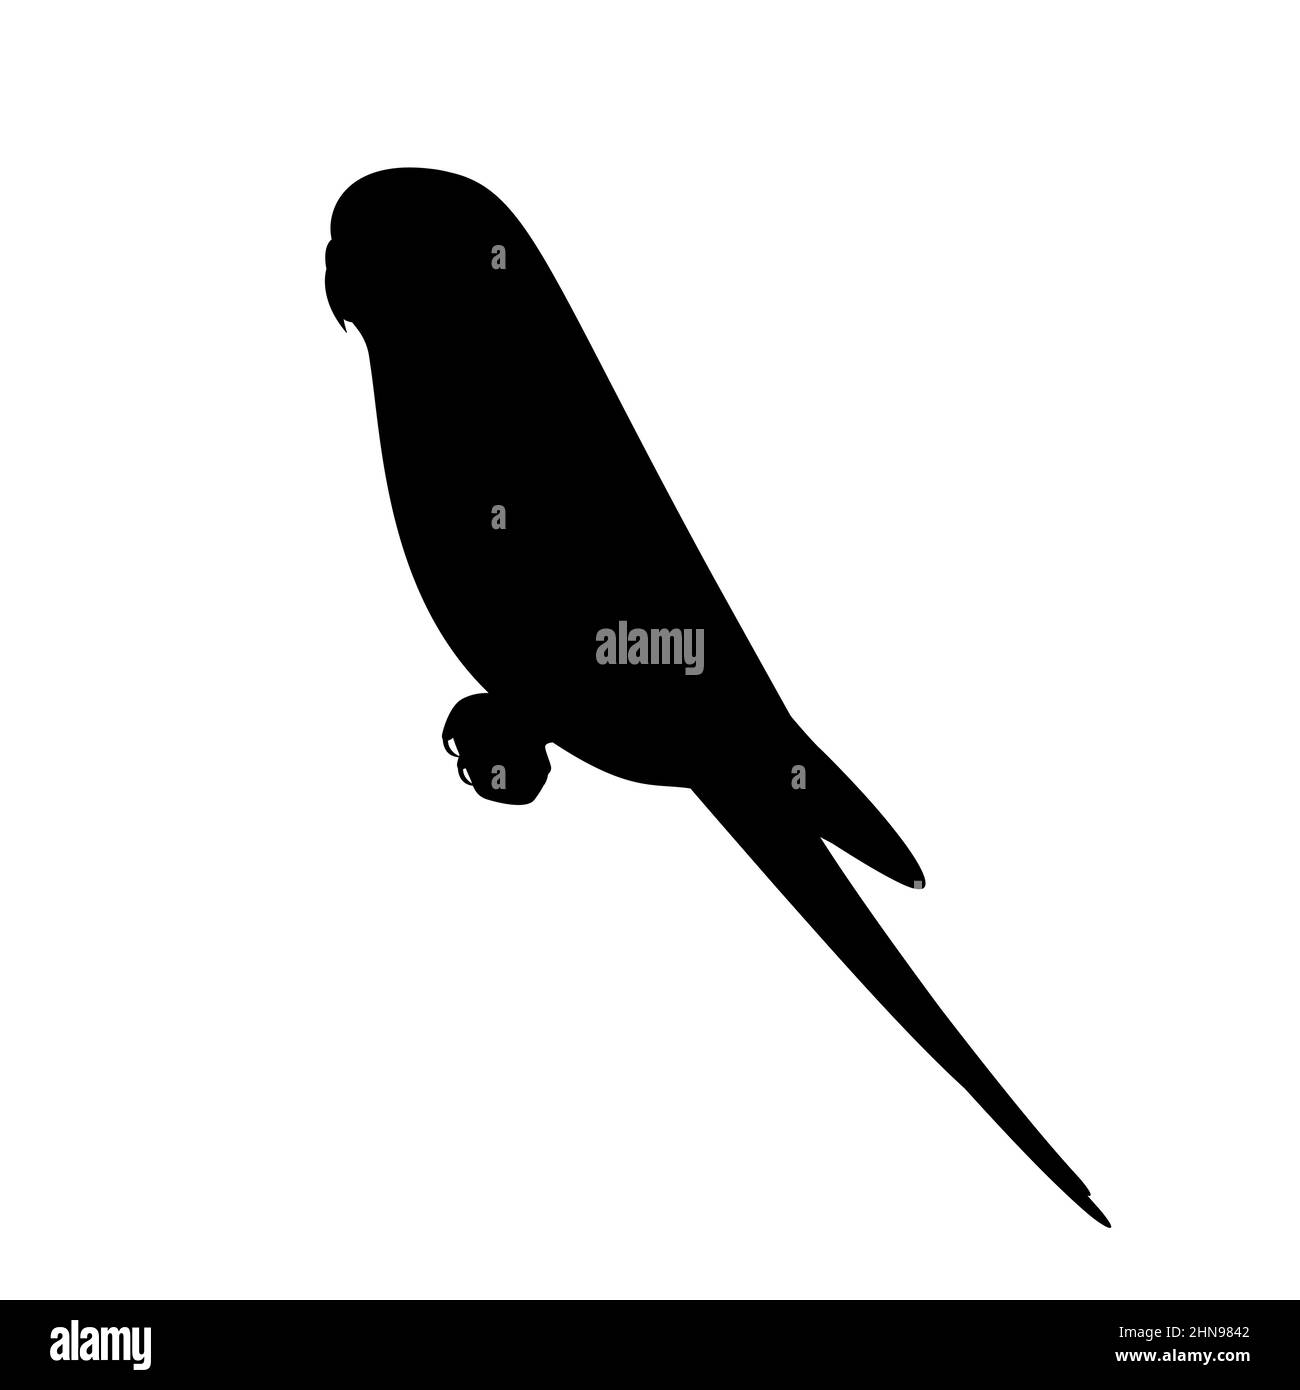 Silhouette of a sitting budgie. Vector illustration of a black silhouette logo icon of a Budgerigar parrot isolated on a white background. Stock Vector